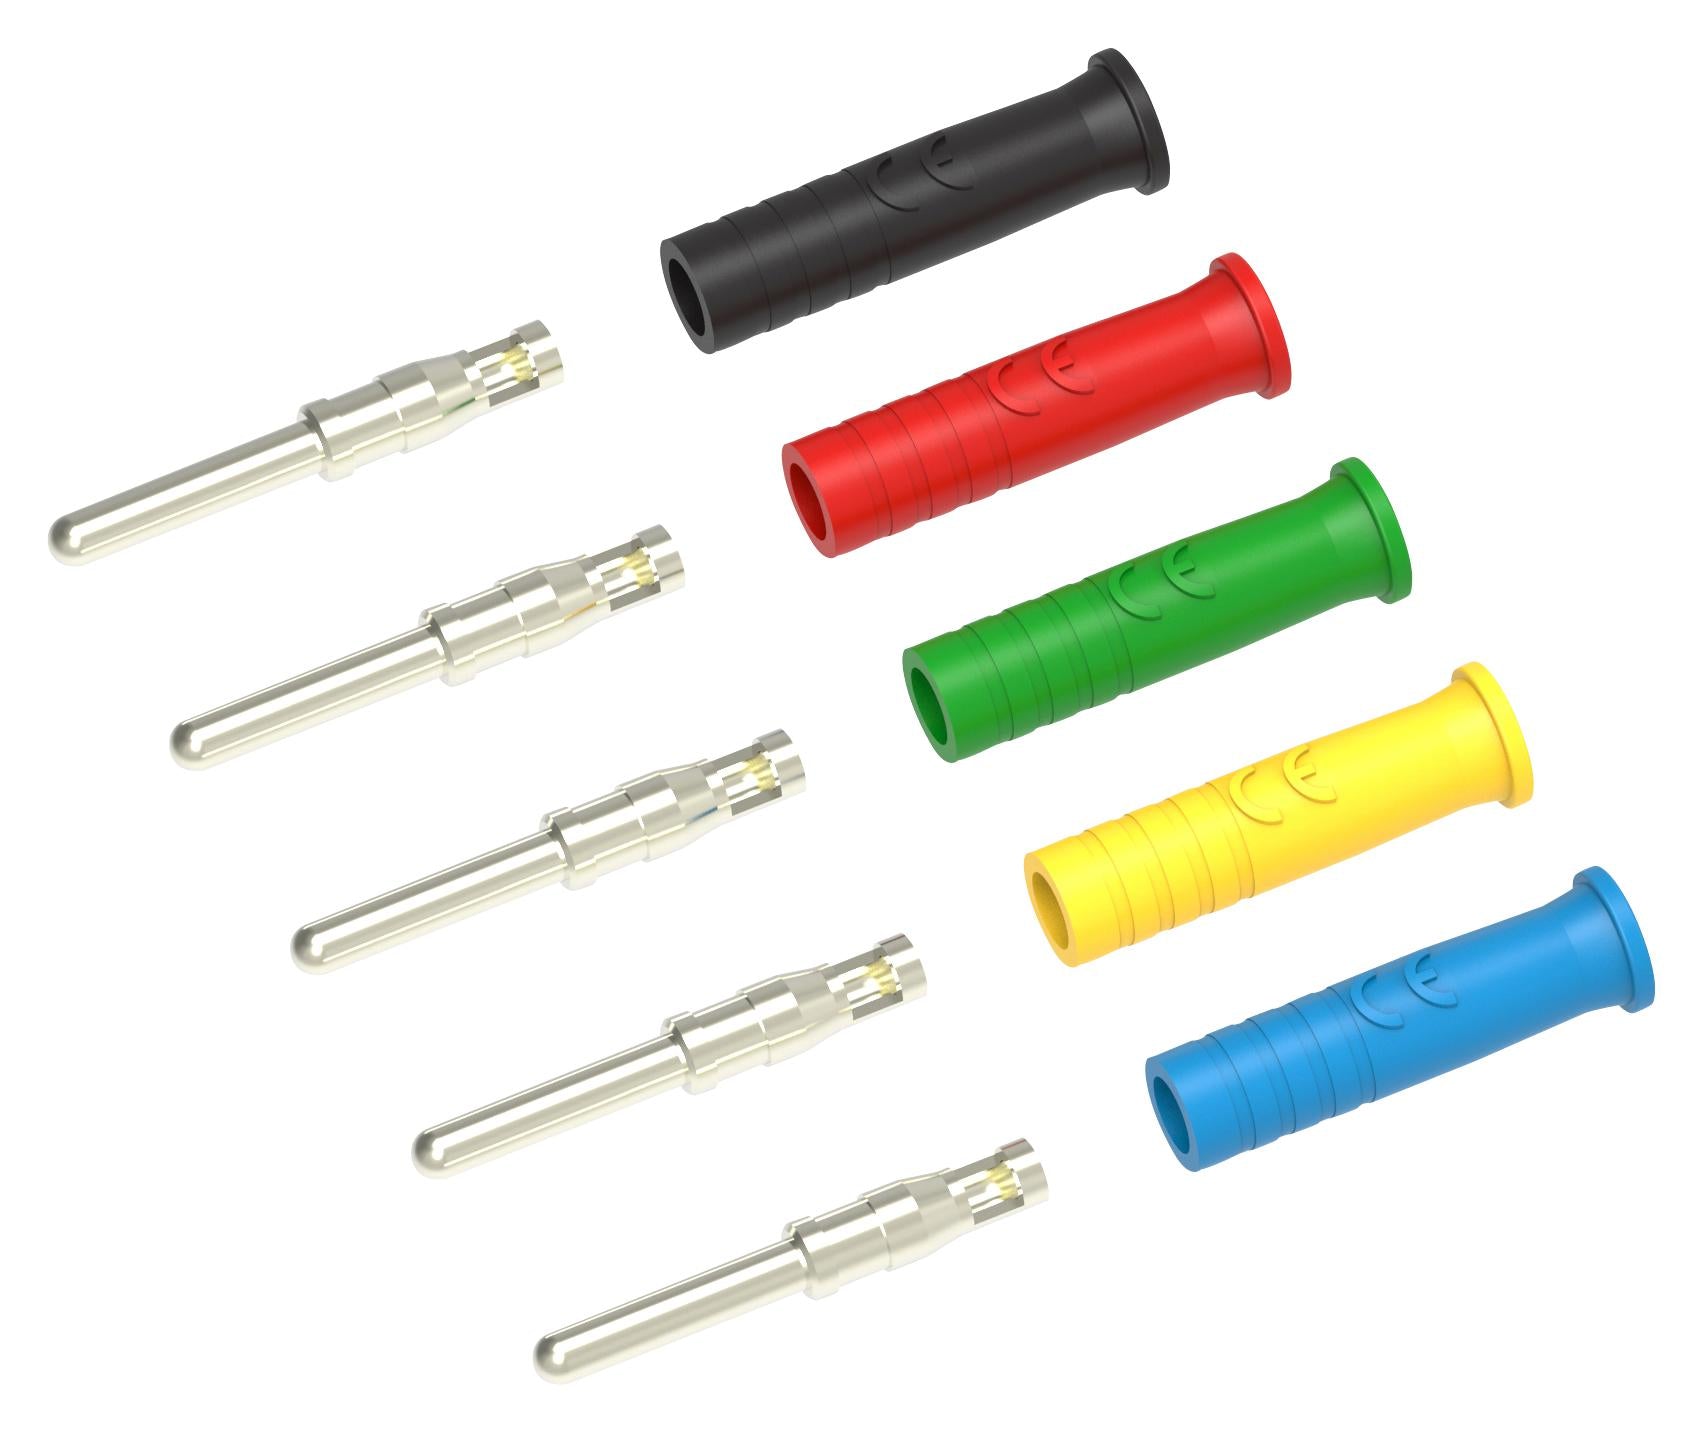 72-14360 TEST CONNECTOR KIT, 2MM PIN, 1A TENMA